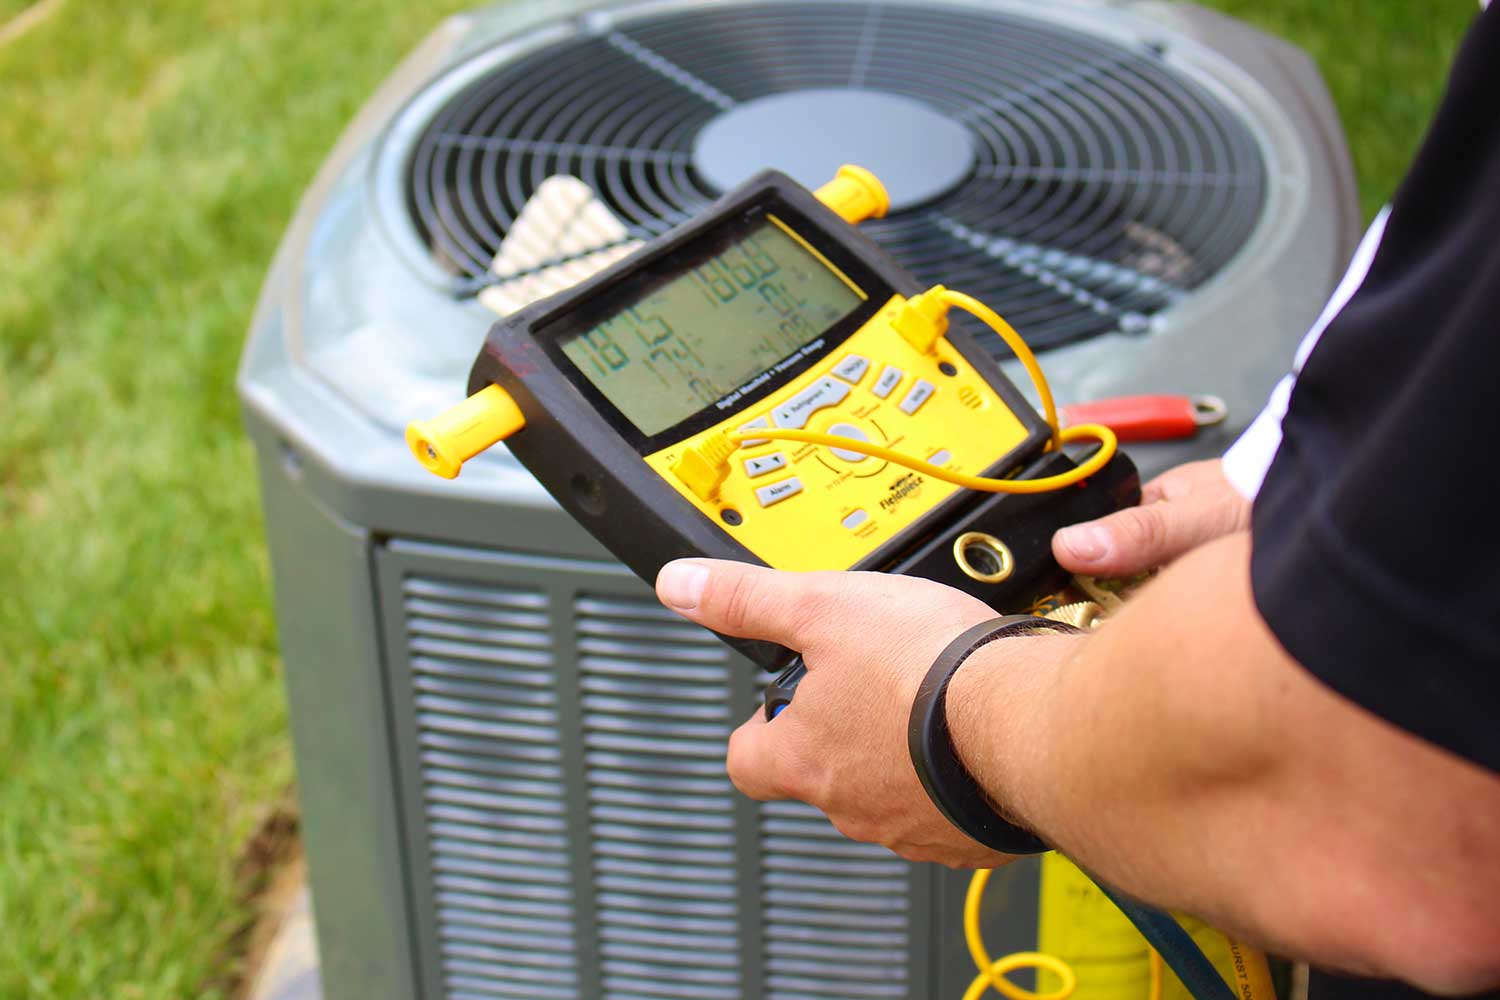 Fall service inspections by Heating and Air Conditioning professional